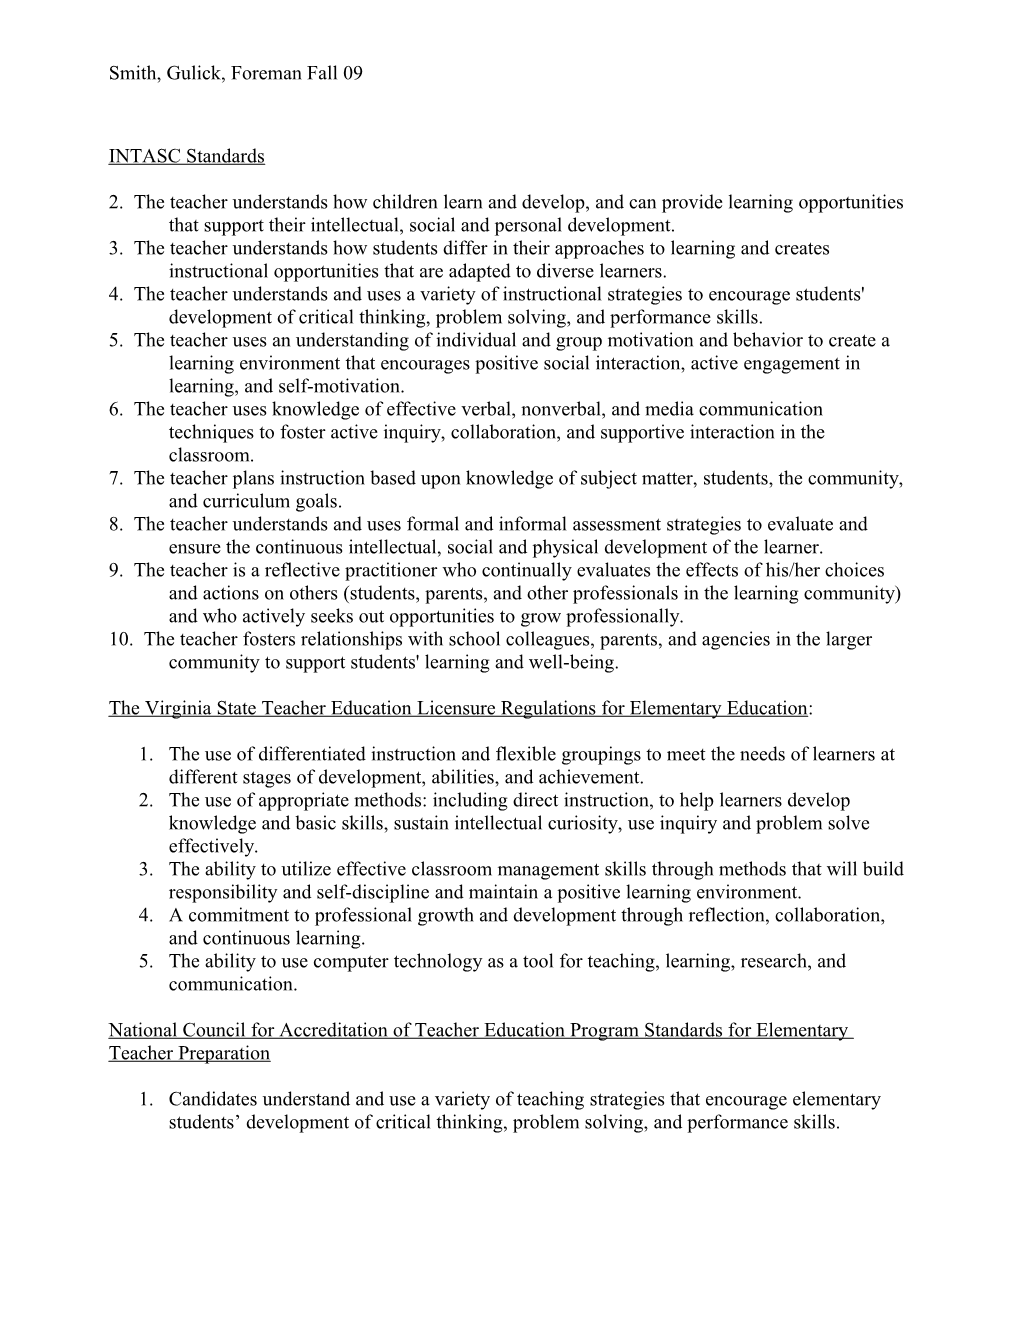 Ideas for and Thoughts on Curriculum I: EDUC 544